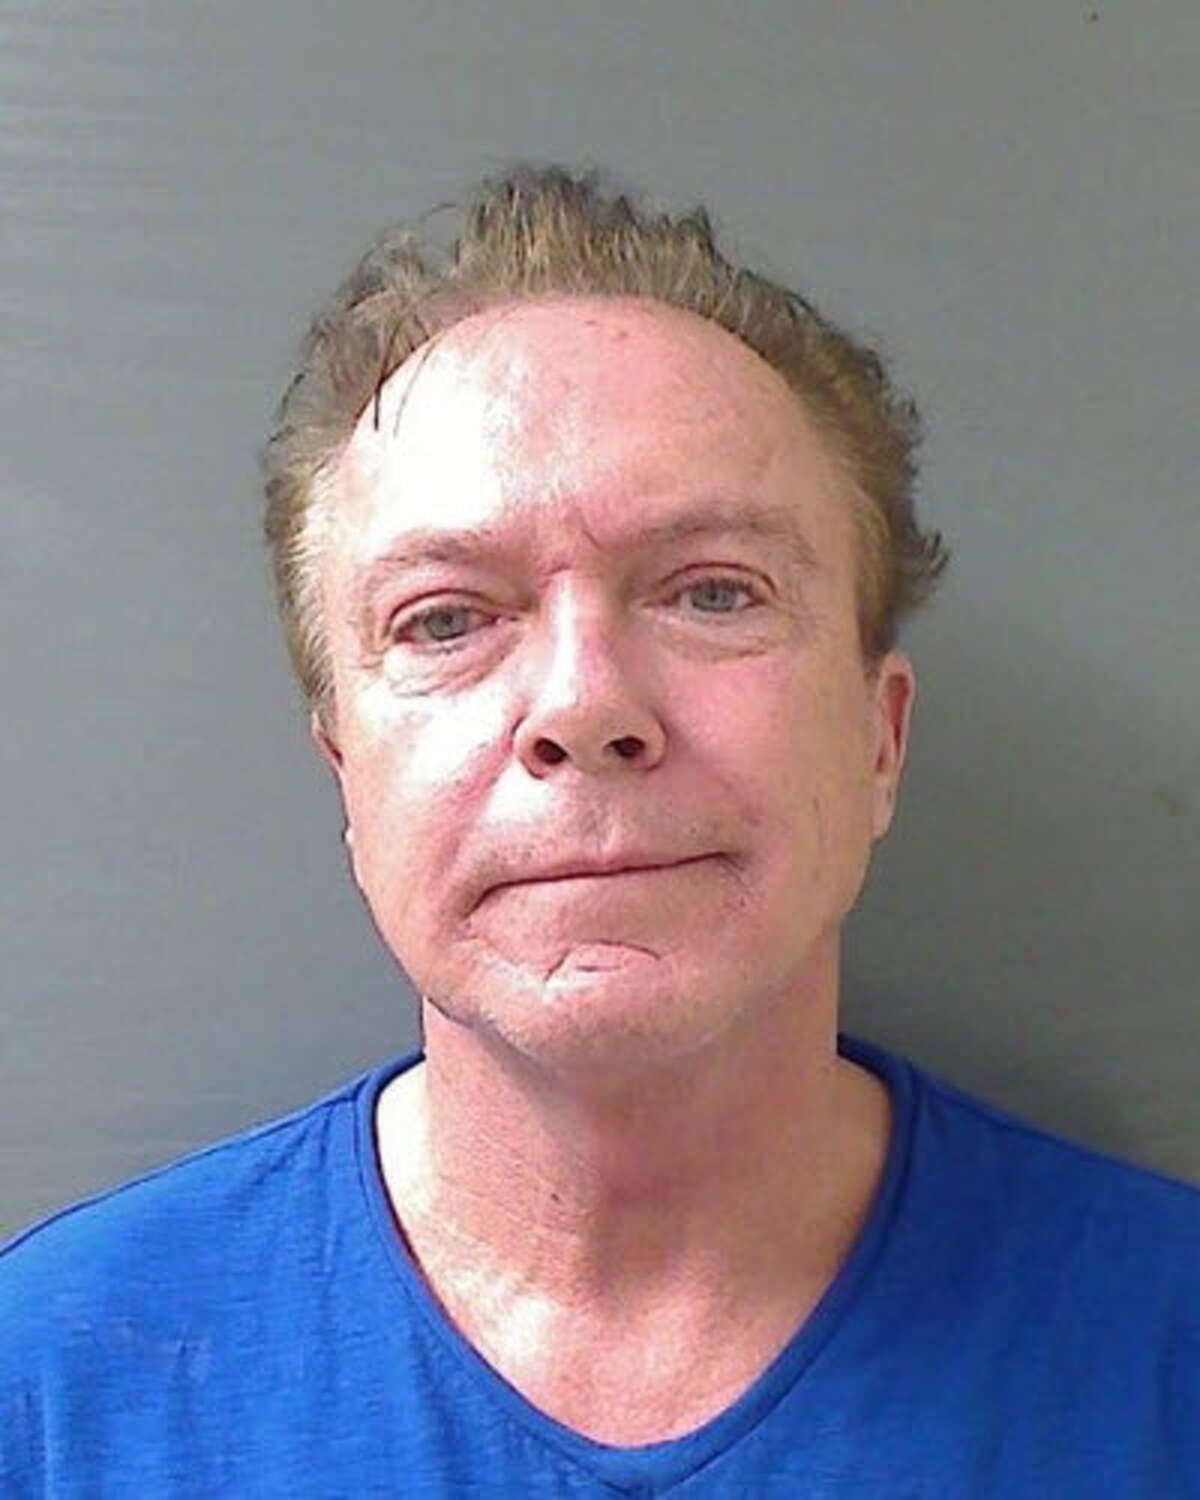 The mugshot from David Cassidy's arrest in Schodack on Aug. 21, 2013. (Schodack Police Department)